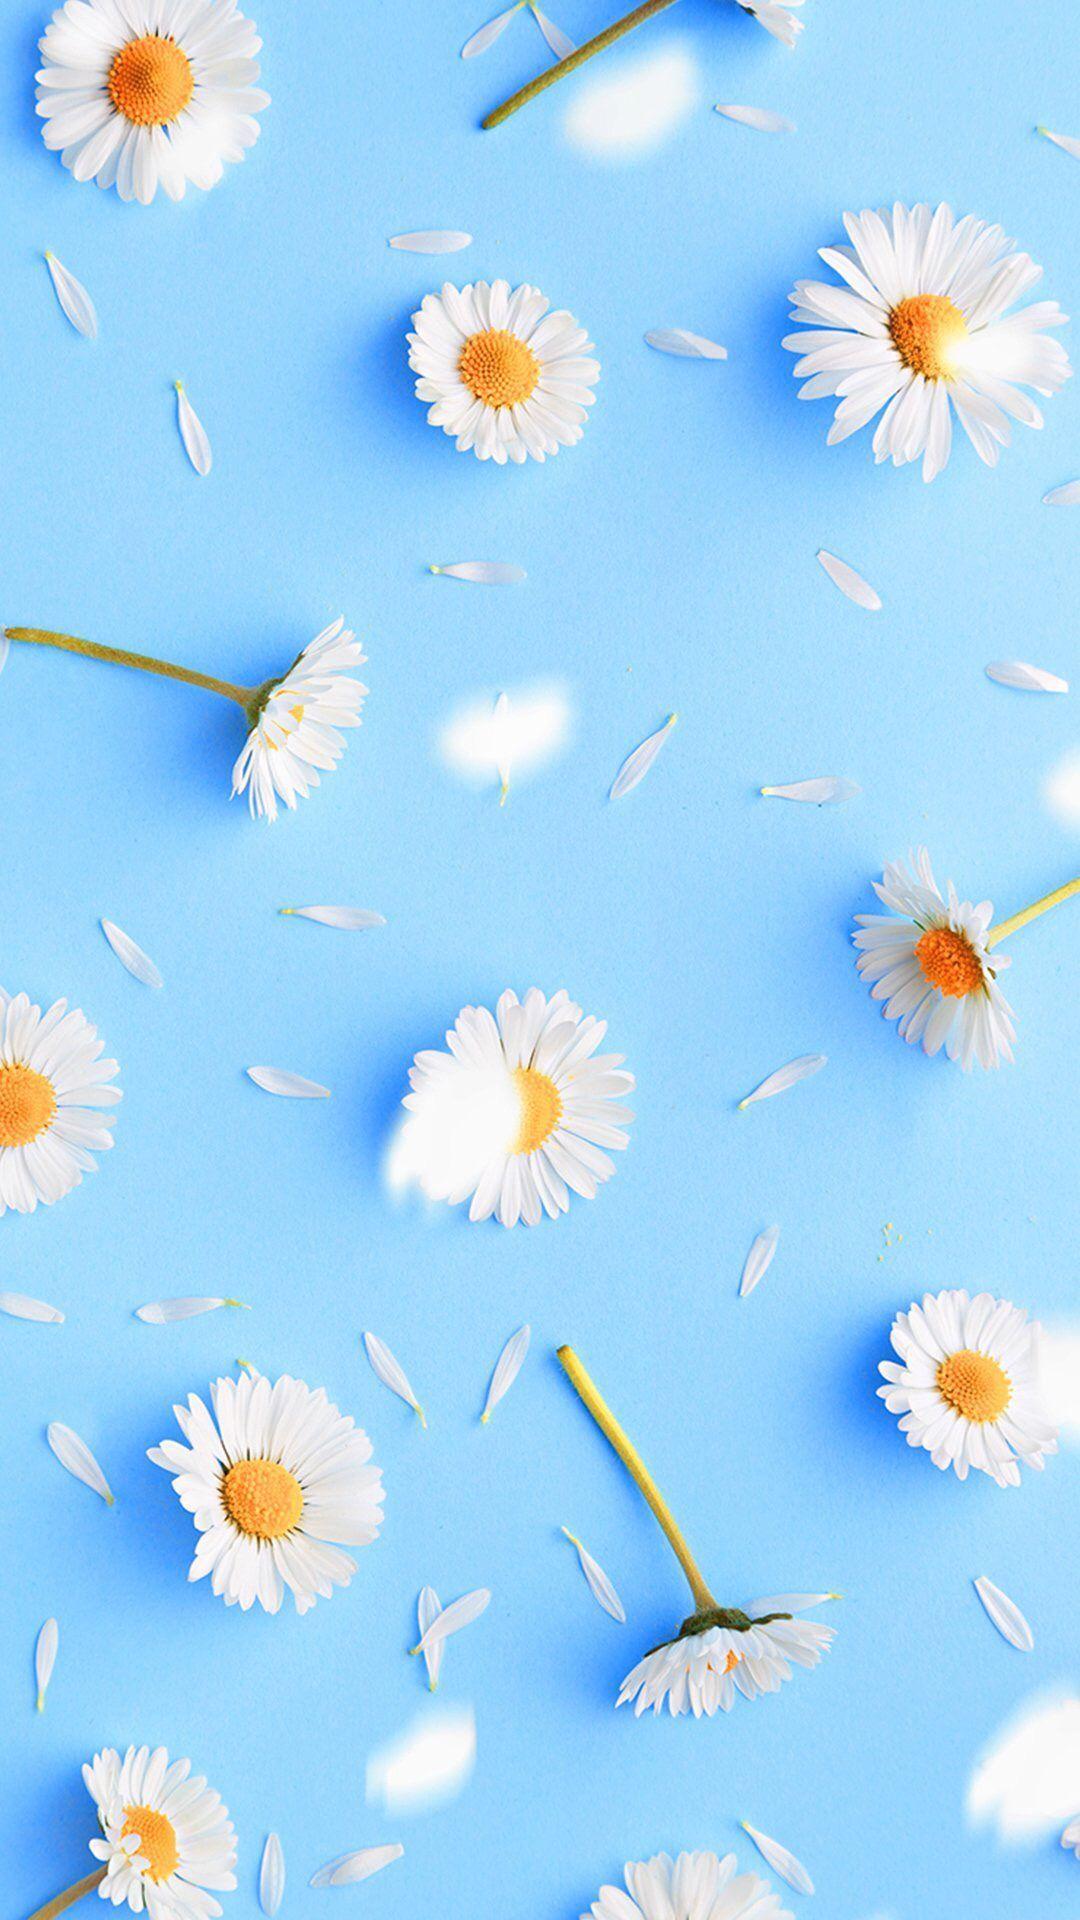 Daisy iPhone wallpaper 1. Top Ideas To Try. Recipes, Hairstyles